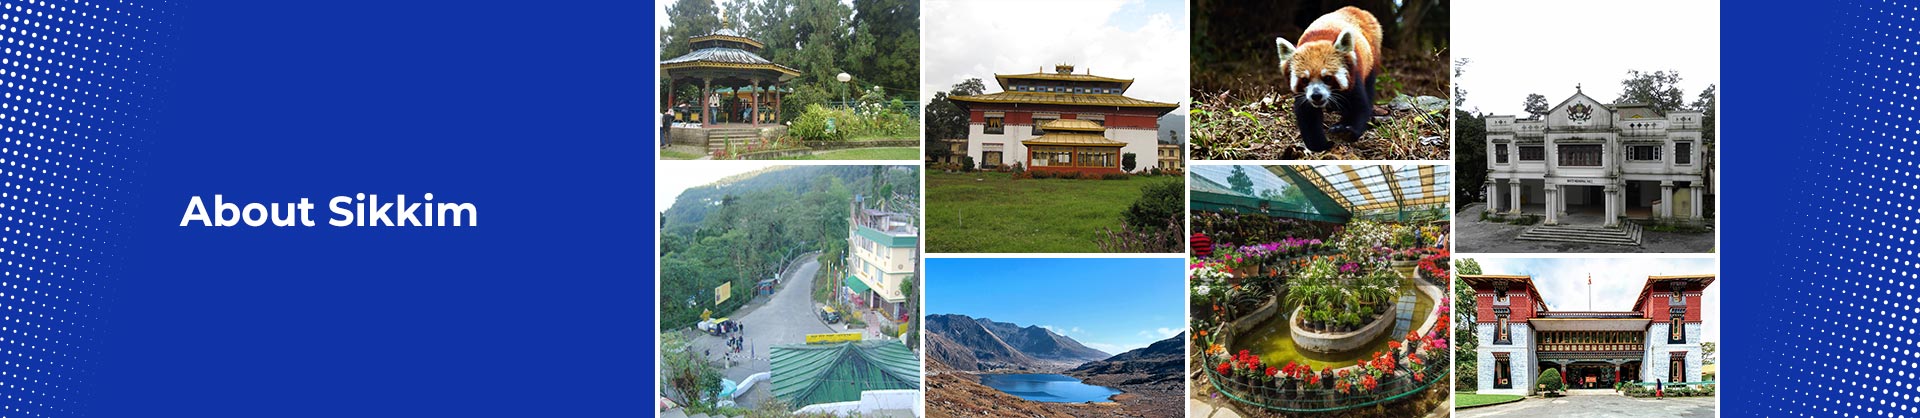 About Sikkim